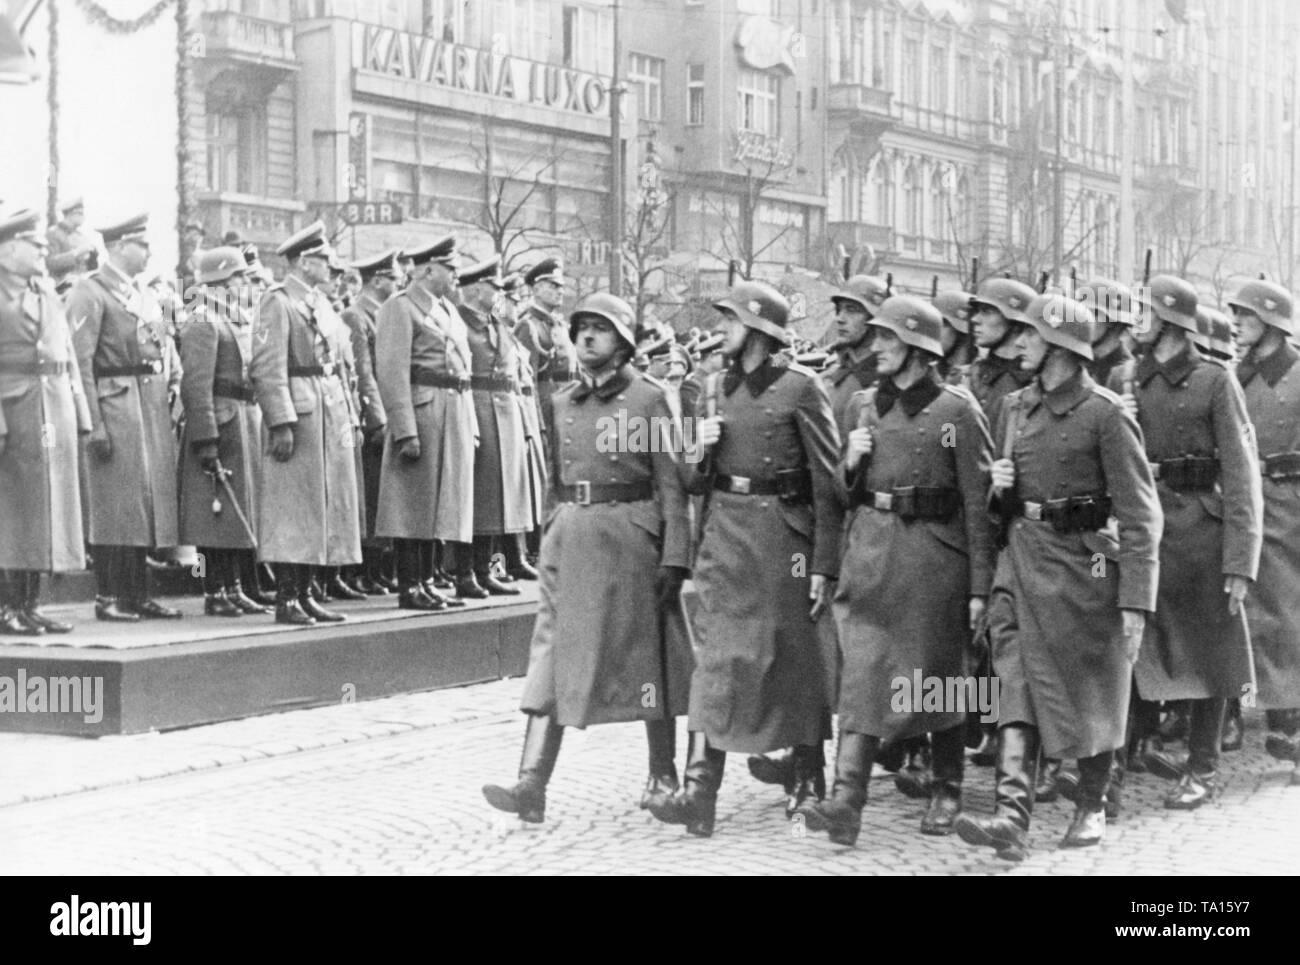 Military parade at Wenceslas Square on the occasion of the anniversary of the Protectorate of Bohemia and Moravia. The troops march past the Reich Protector of Bohemia and Moravia, Konstantin von Neurath. The first Slovak Republic was founded under Hitler's pressure in March 1939, and Bohemia and Moravia were occupied by the Wehrmacht. Stock Photo